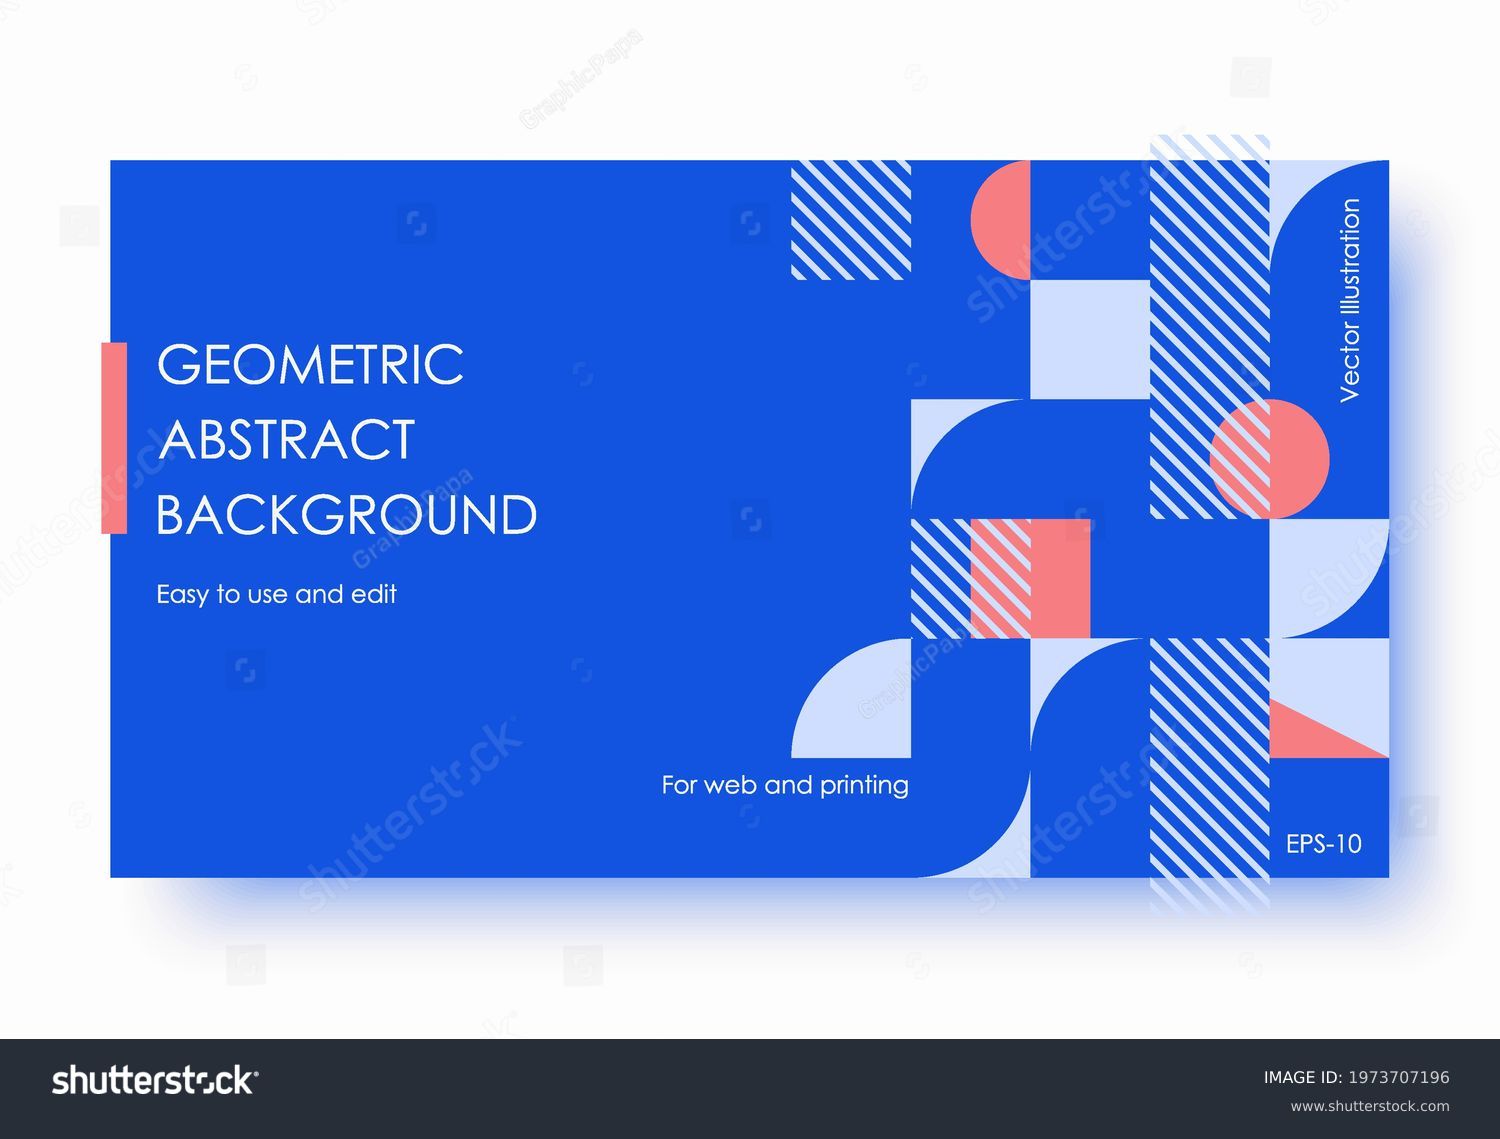 Geometric Abstract Backgrounds Design. Composition of simple geometric shapes on a blue background. For use in Presentation, Flyer and Leaflet, Cards, Landing, Website Design. Vector illustration. Immagine vettoriale stock